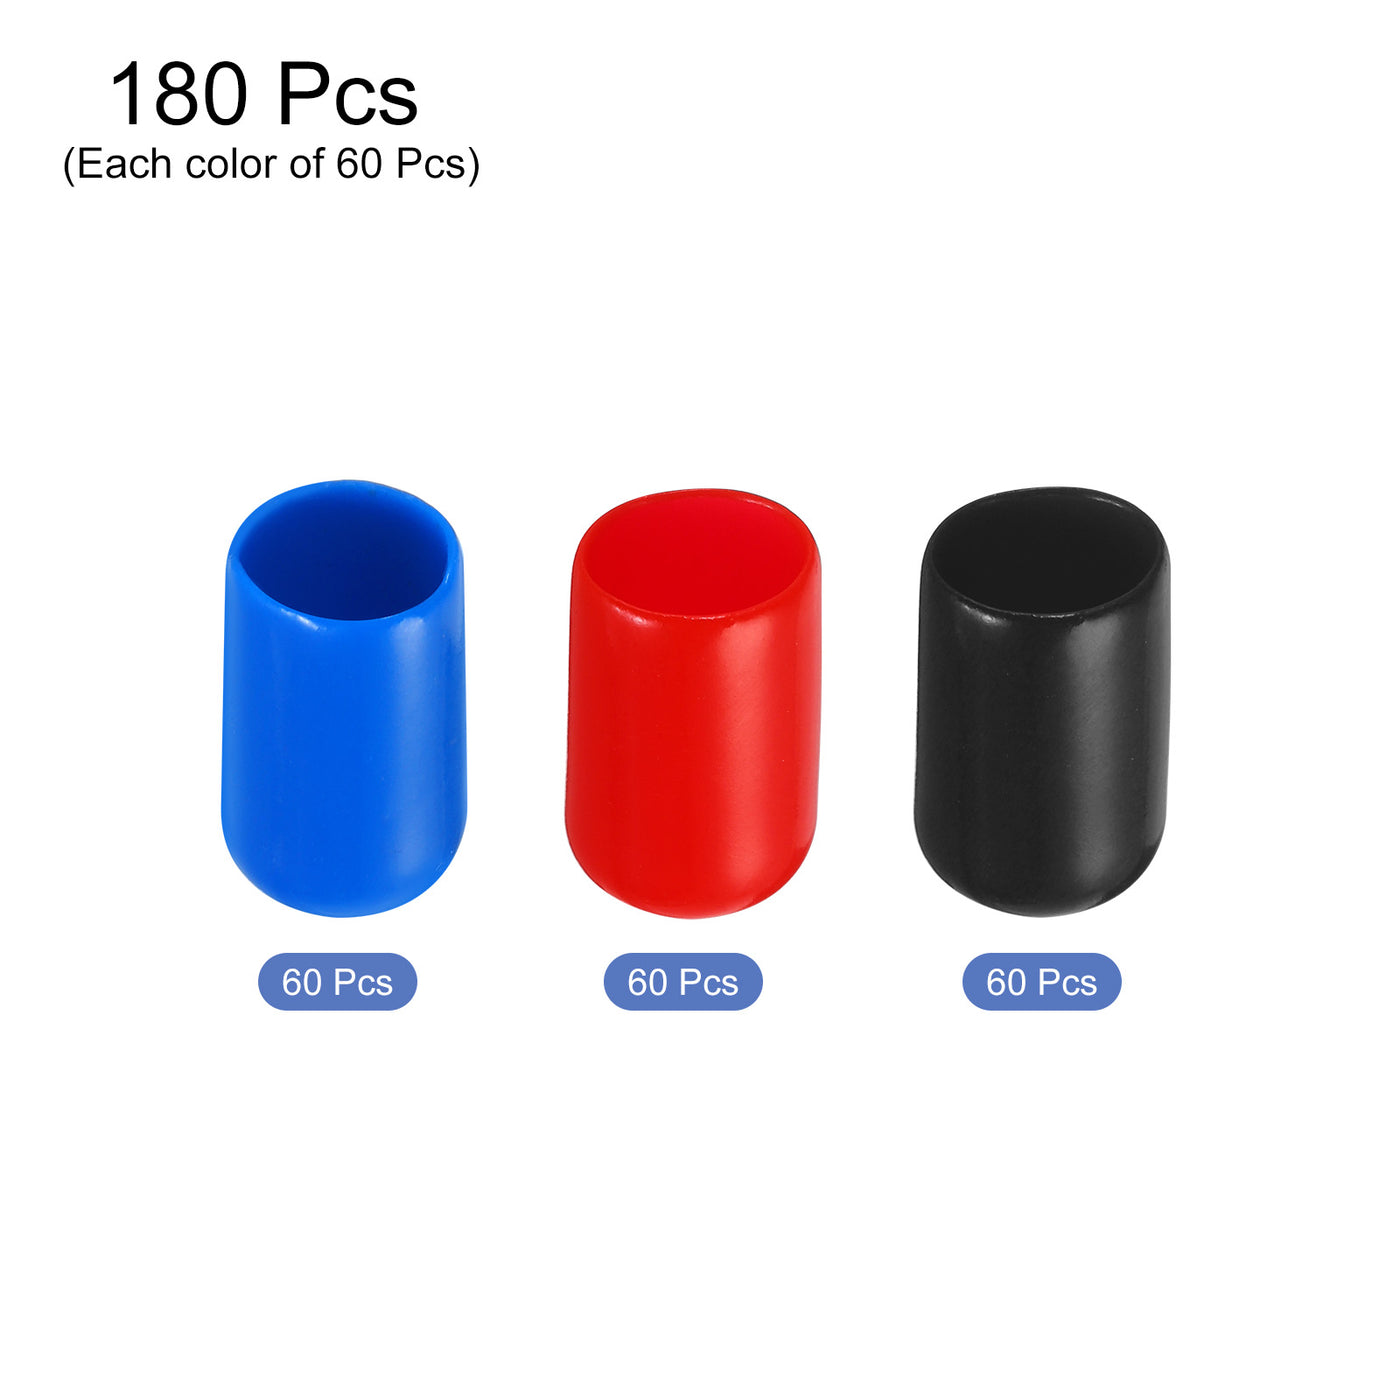 uxcell Uxcell 180pcs Rubber End Caps 8.5mm ID Vinyl PVC Round Tube Bolt Cap Cover Screw Thread Protectors, Black Red Blue